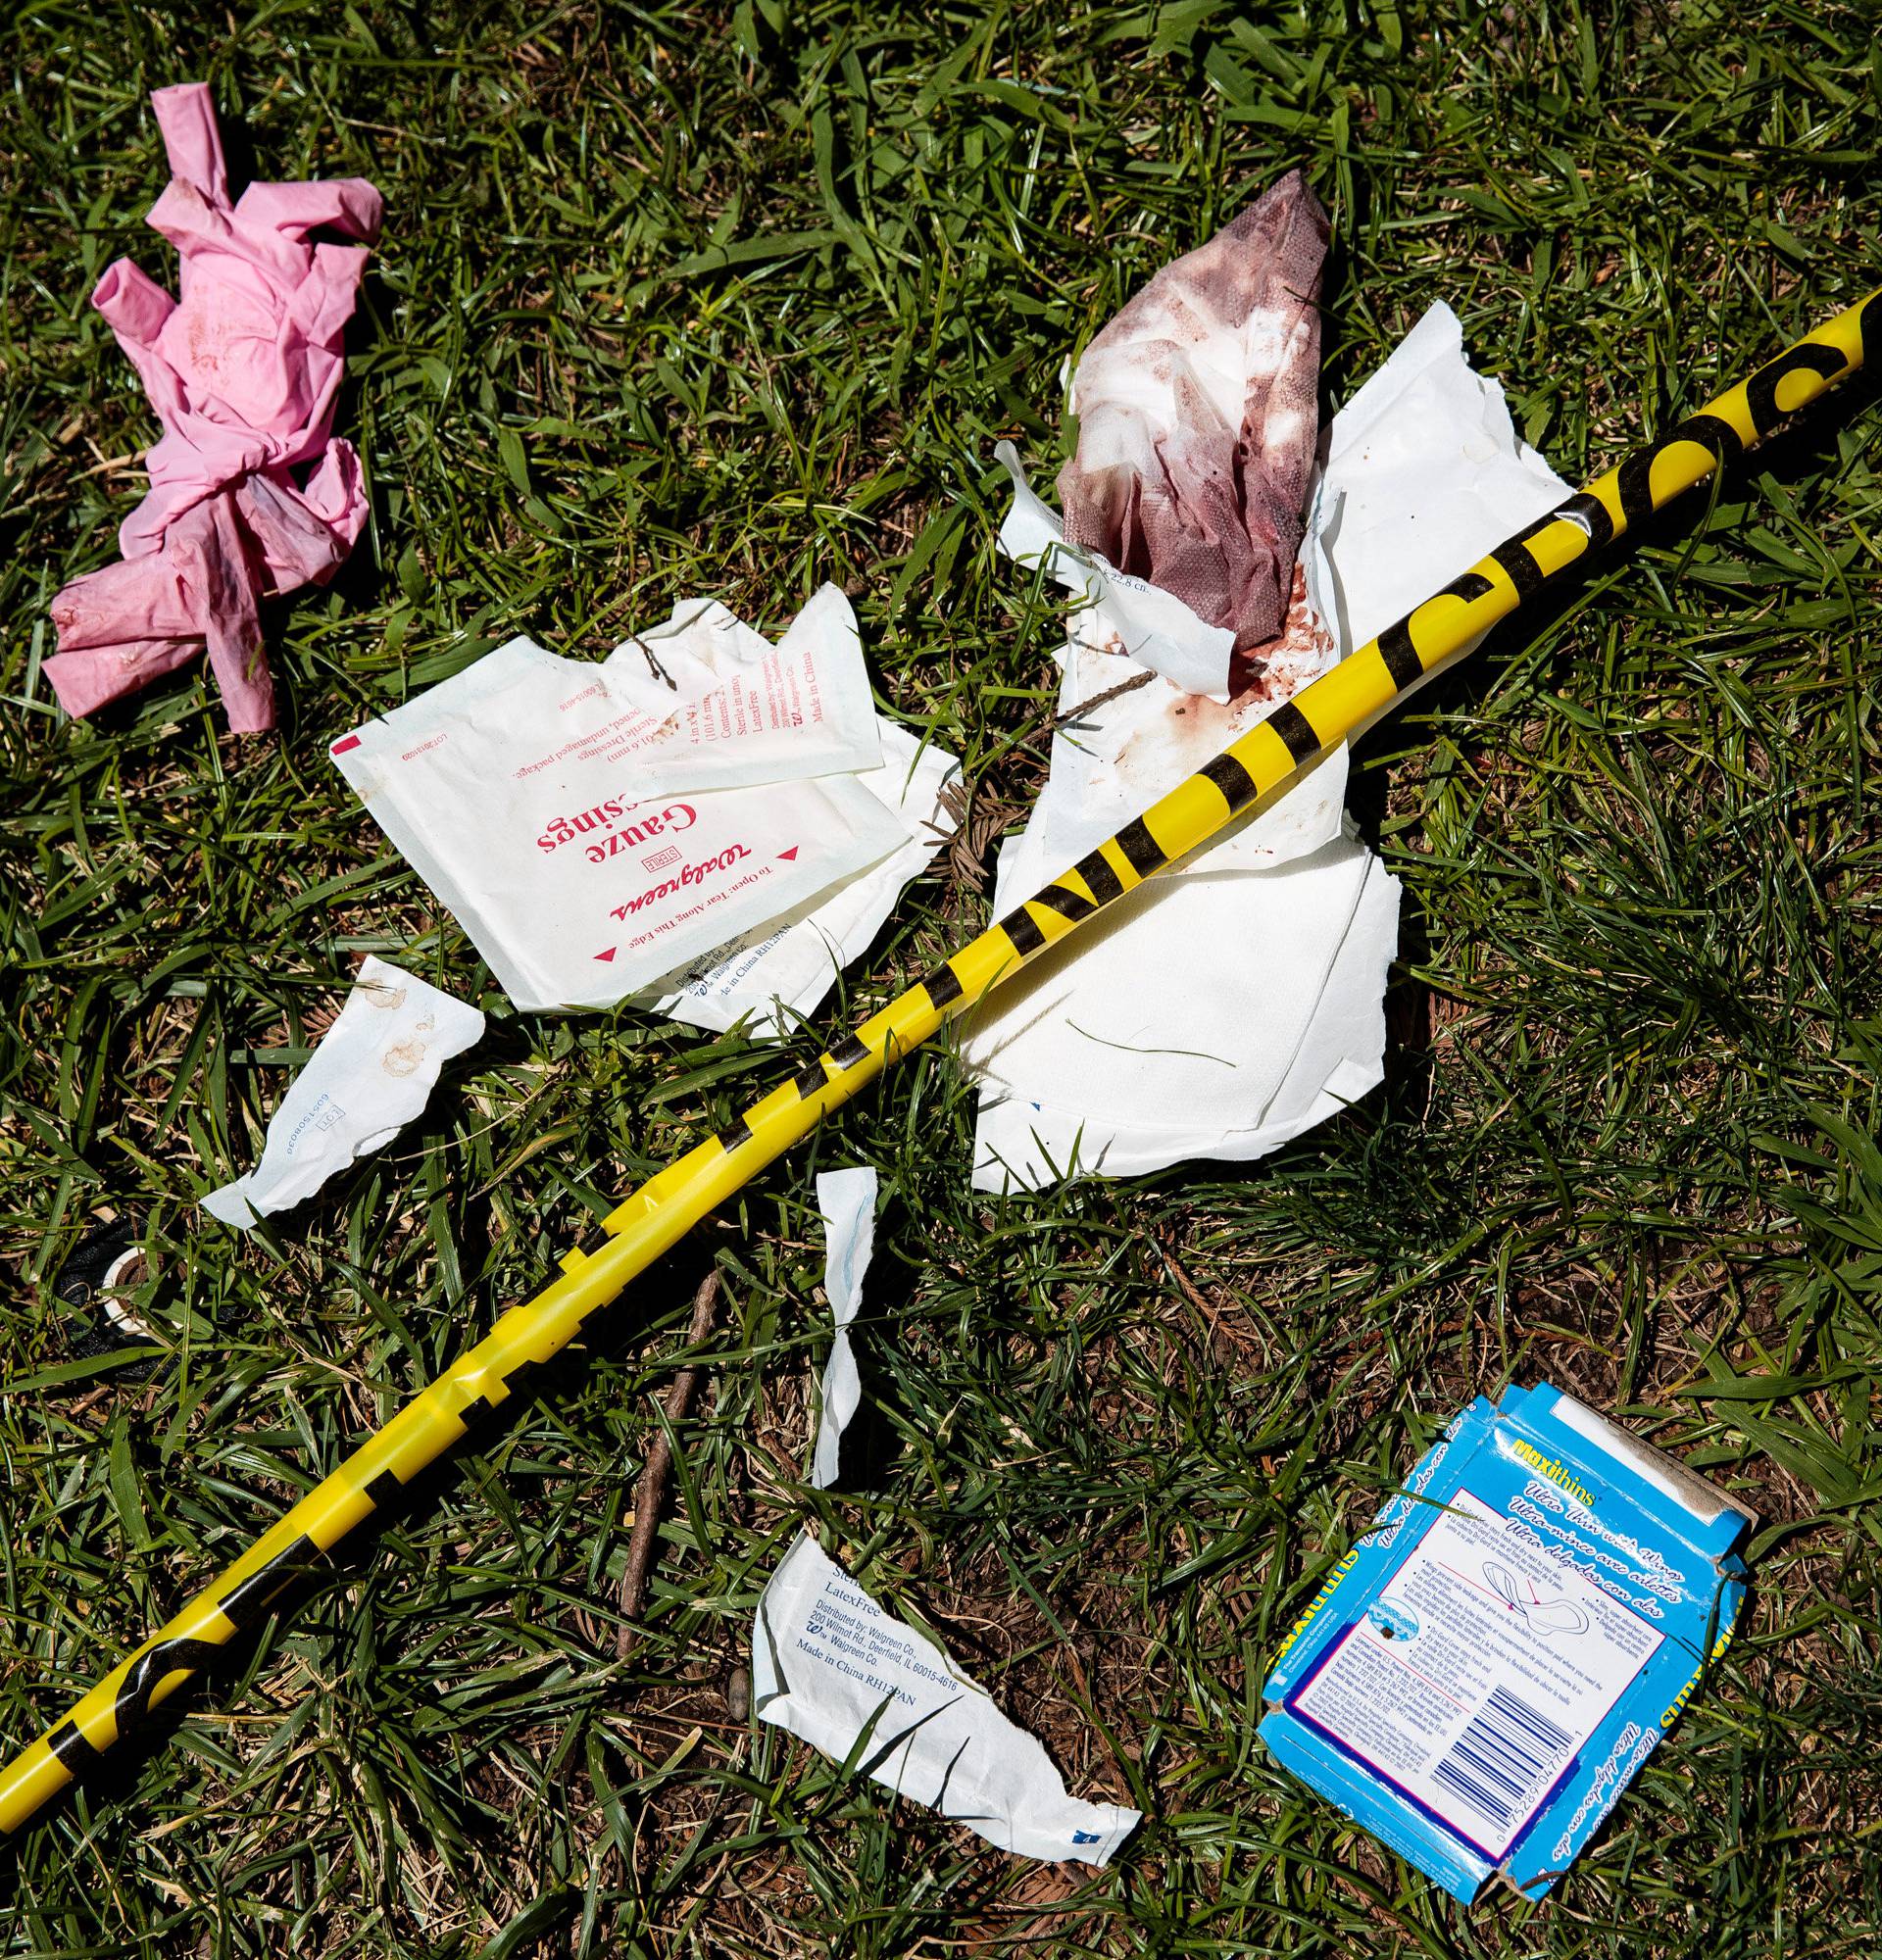 Bloody bandages and police tape lay on the lawn of the California State Capitol after multiple people were stabbed during a clash between neo-Nazis holding a permitted rally and counter-protestors on Sunday in Sacramento.